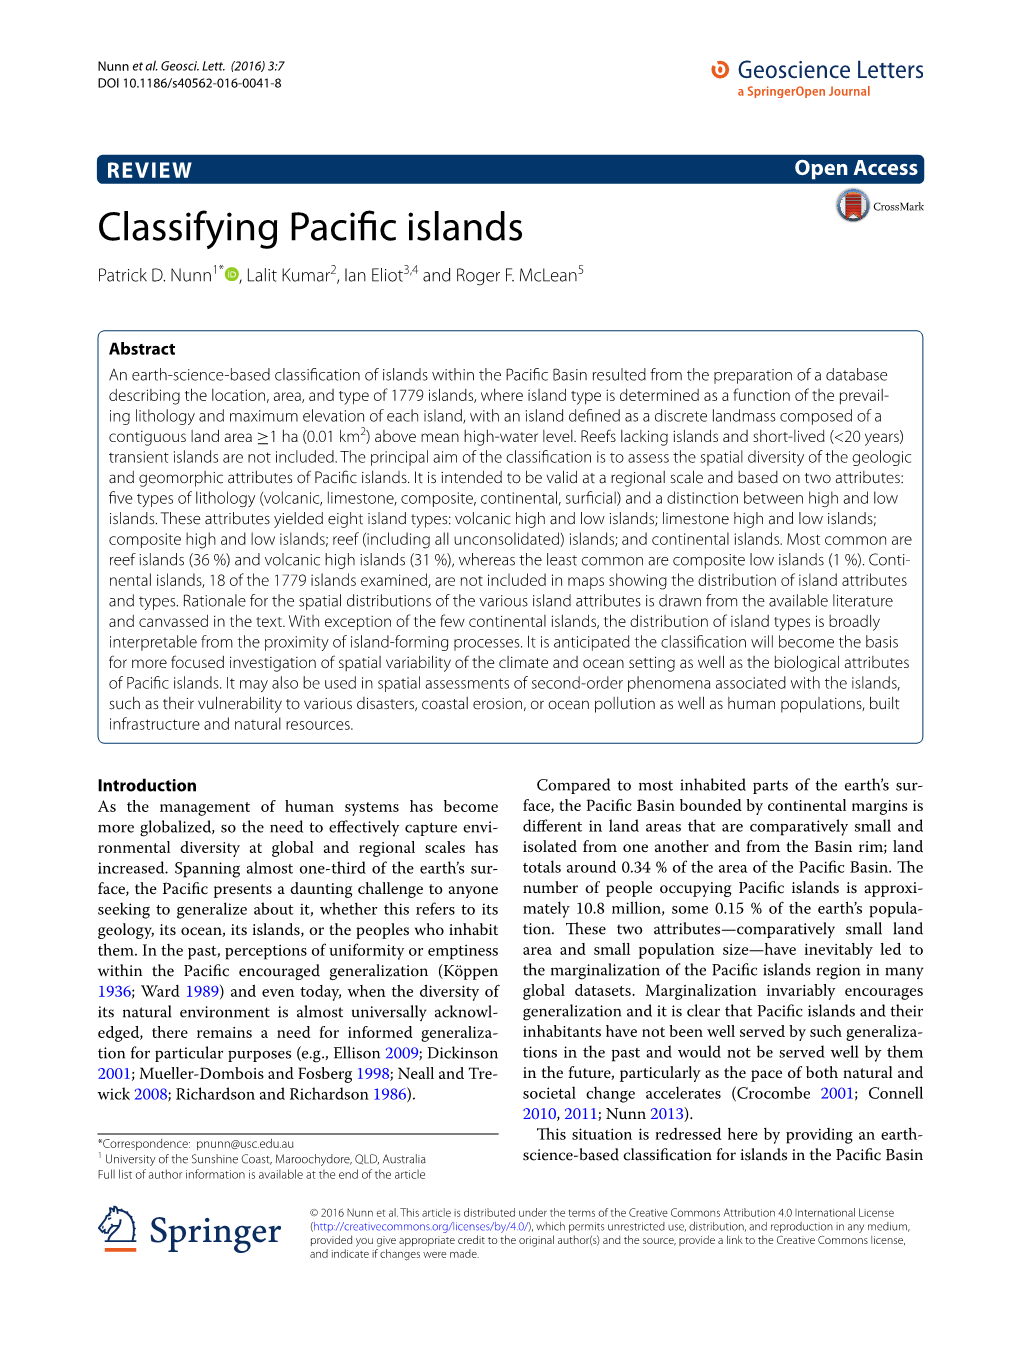 Classifying Pacific Islands Patrick D